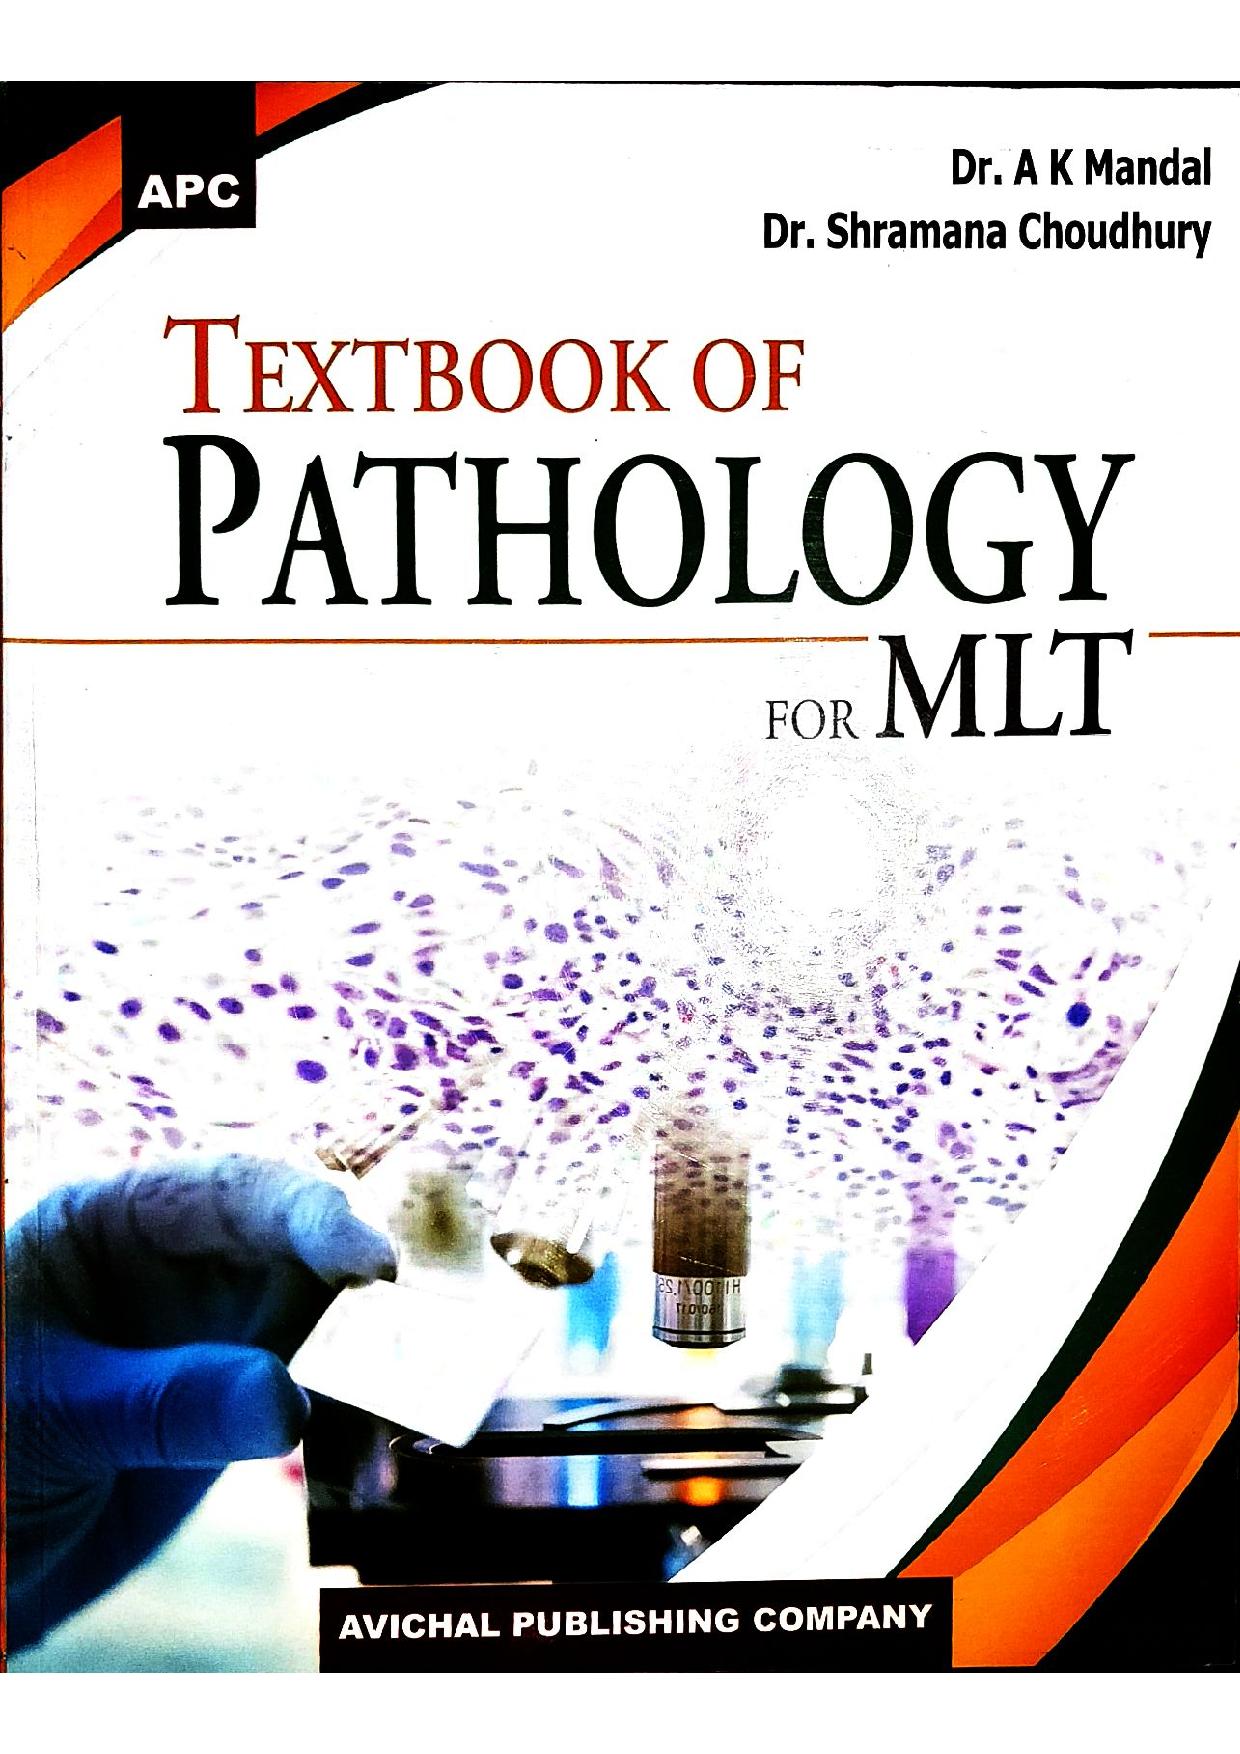 Textbook Of Pathology For MLT